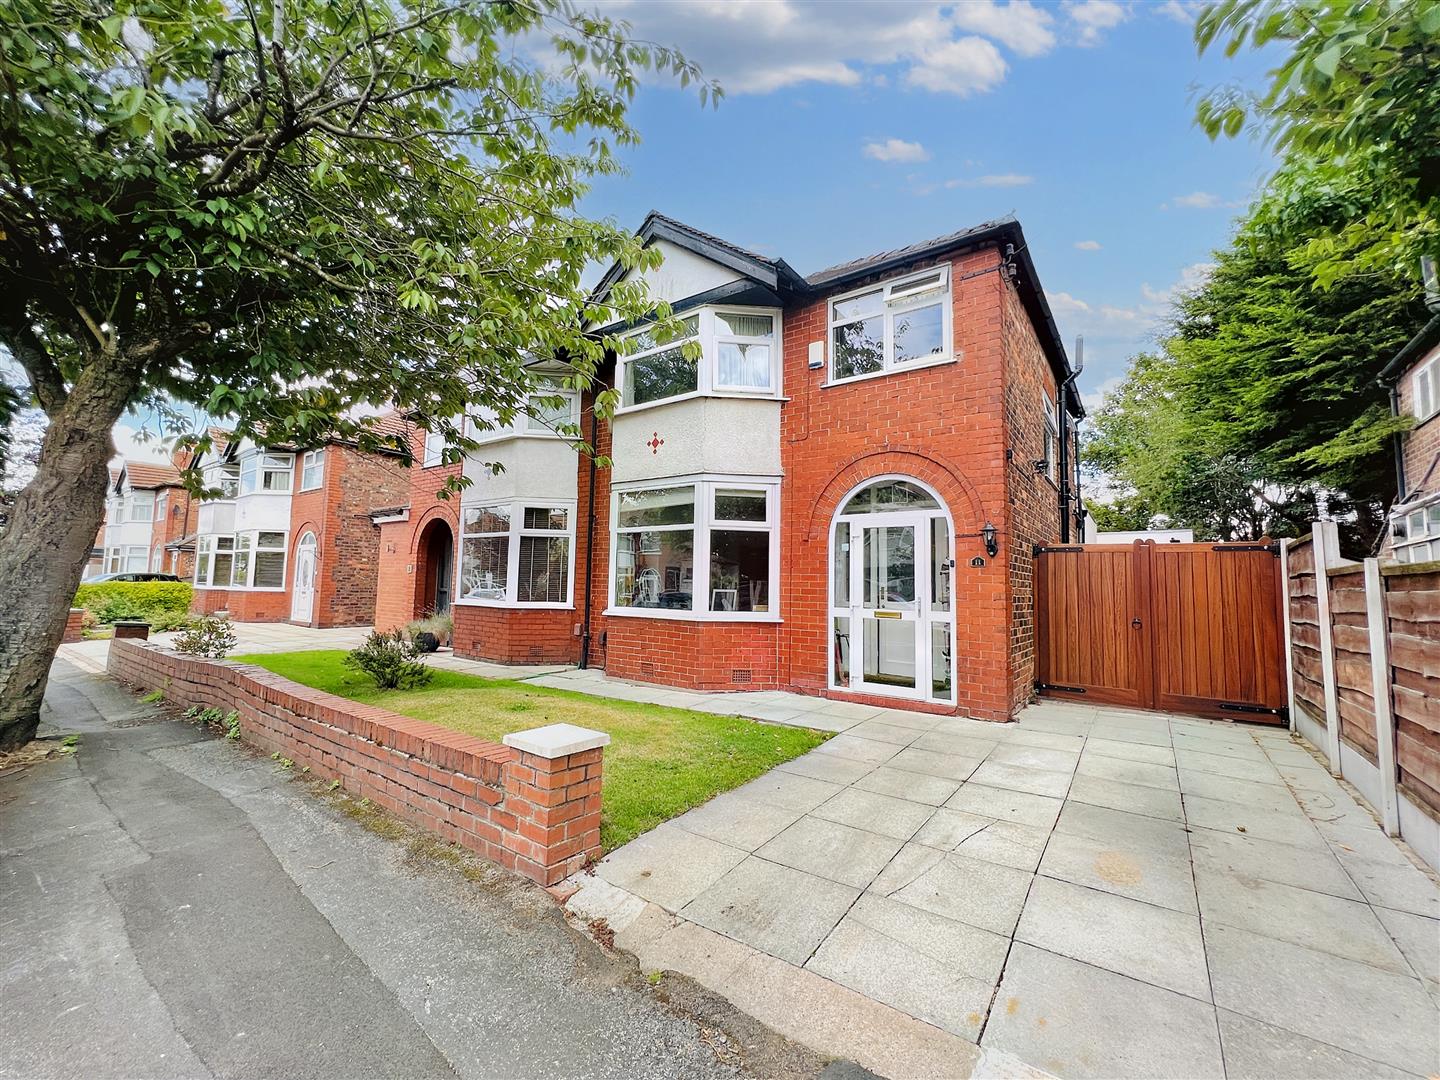 3 bed semi-detached house for sale in Bollin Drive, Altrincham - Property Image 1